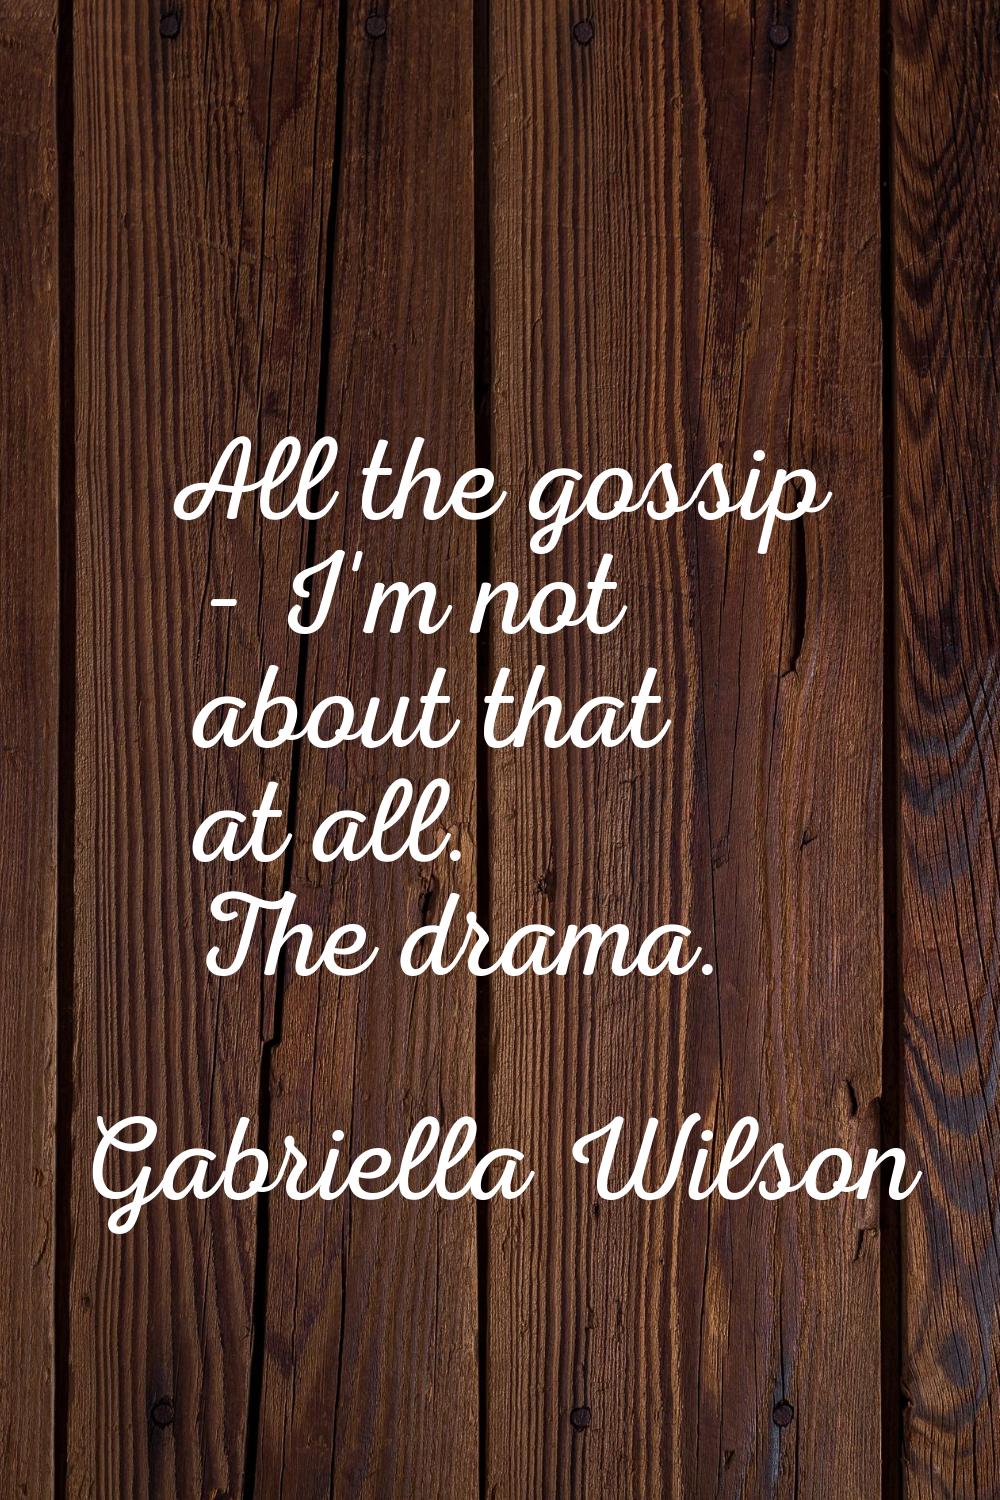 All the gossip - I'm not about that at all. The drama.